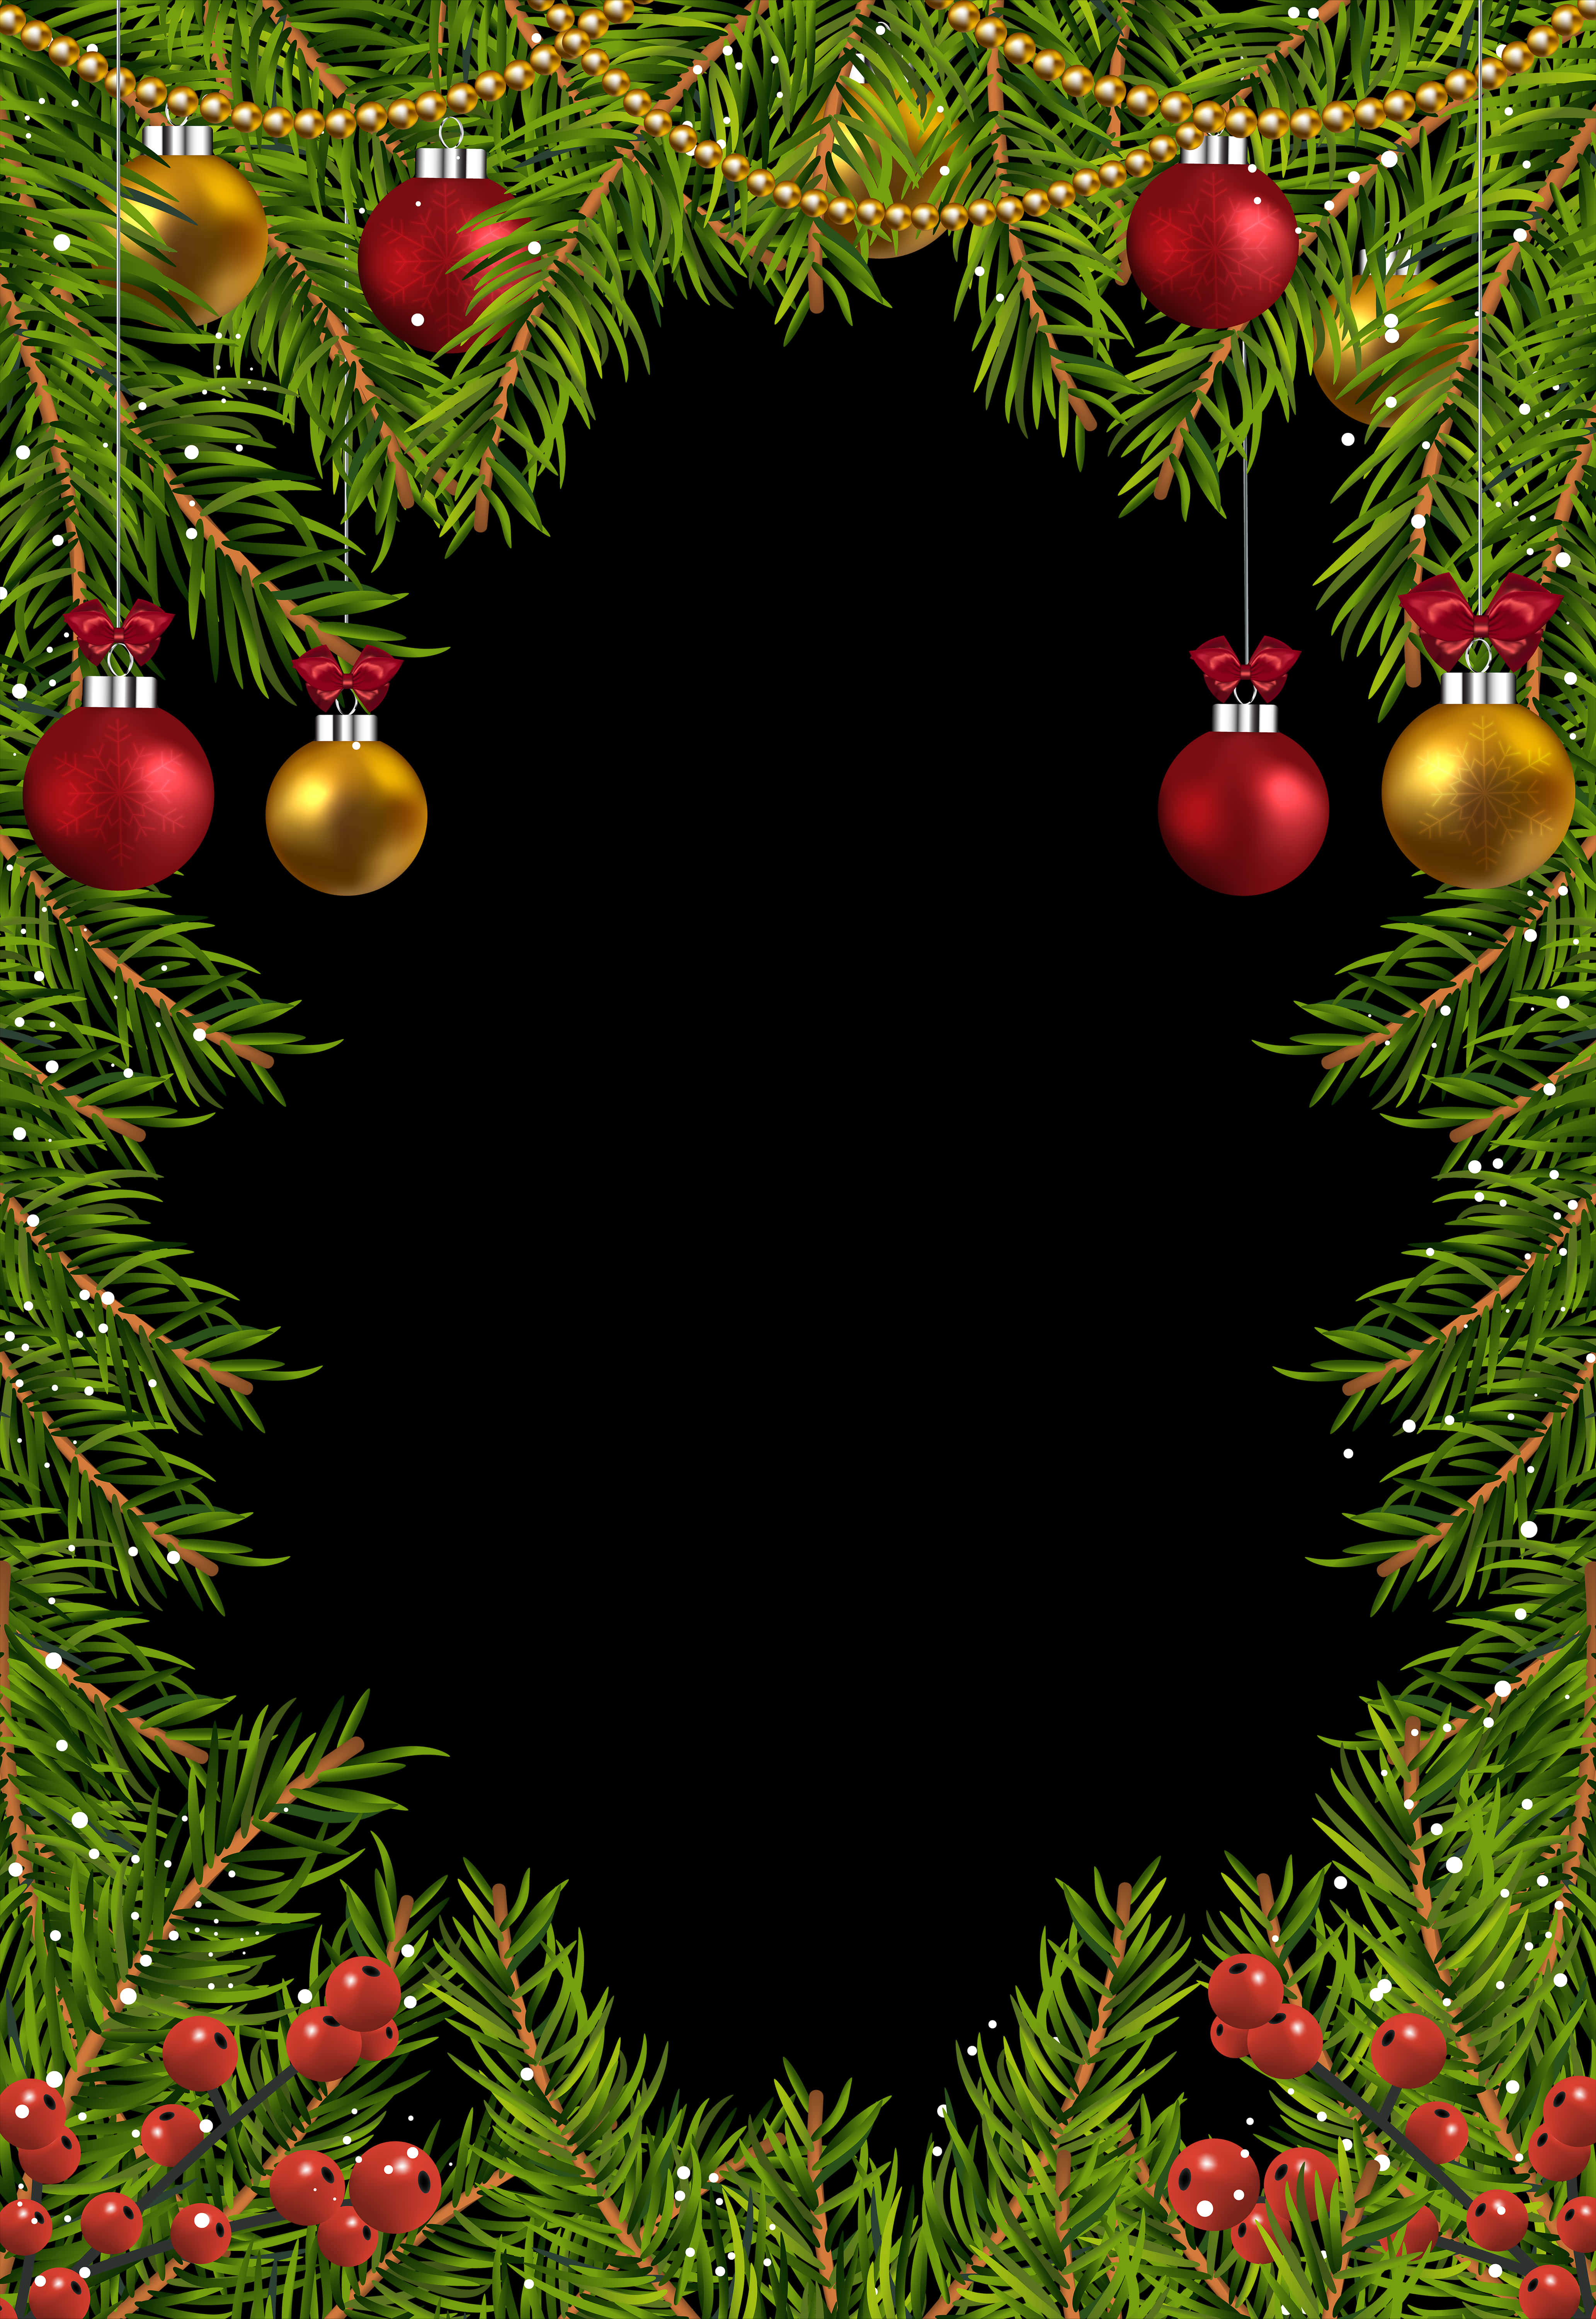 A Christmas Tree Branches With Ornaments